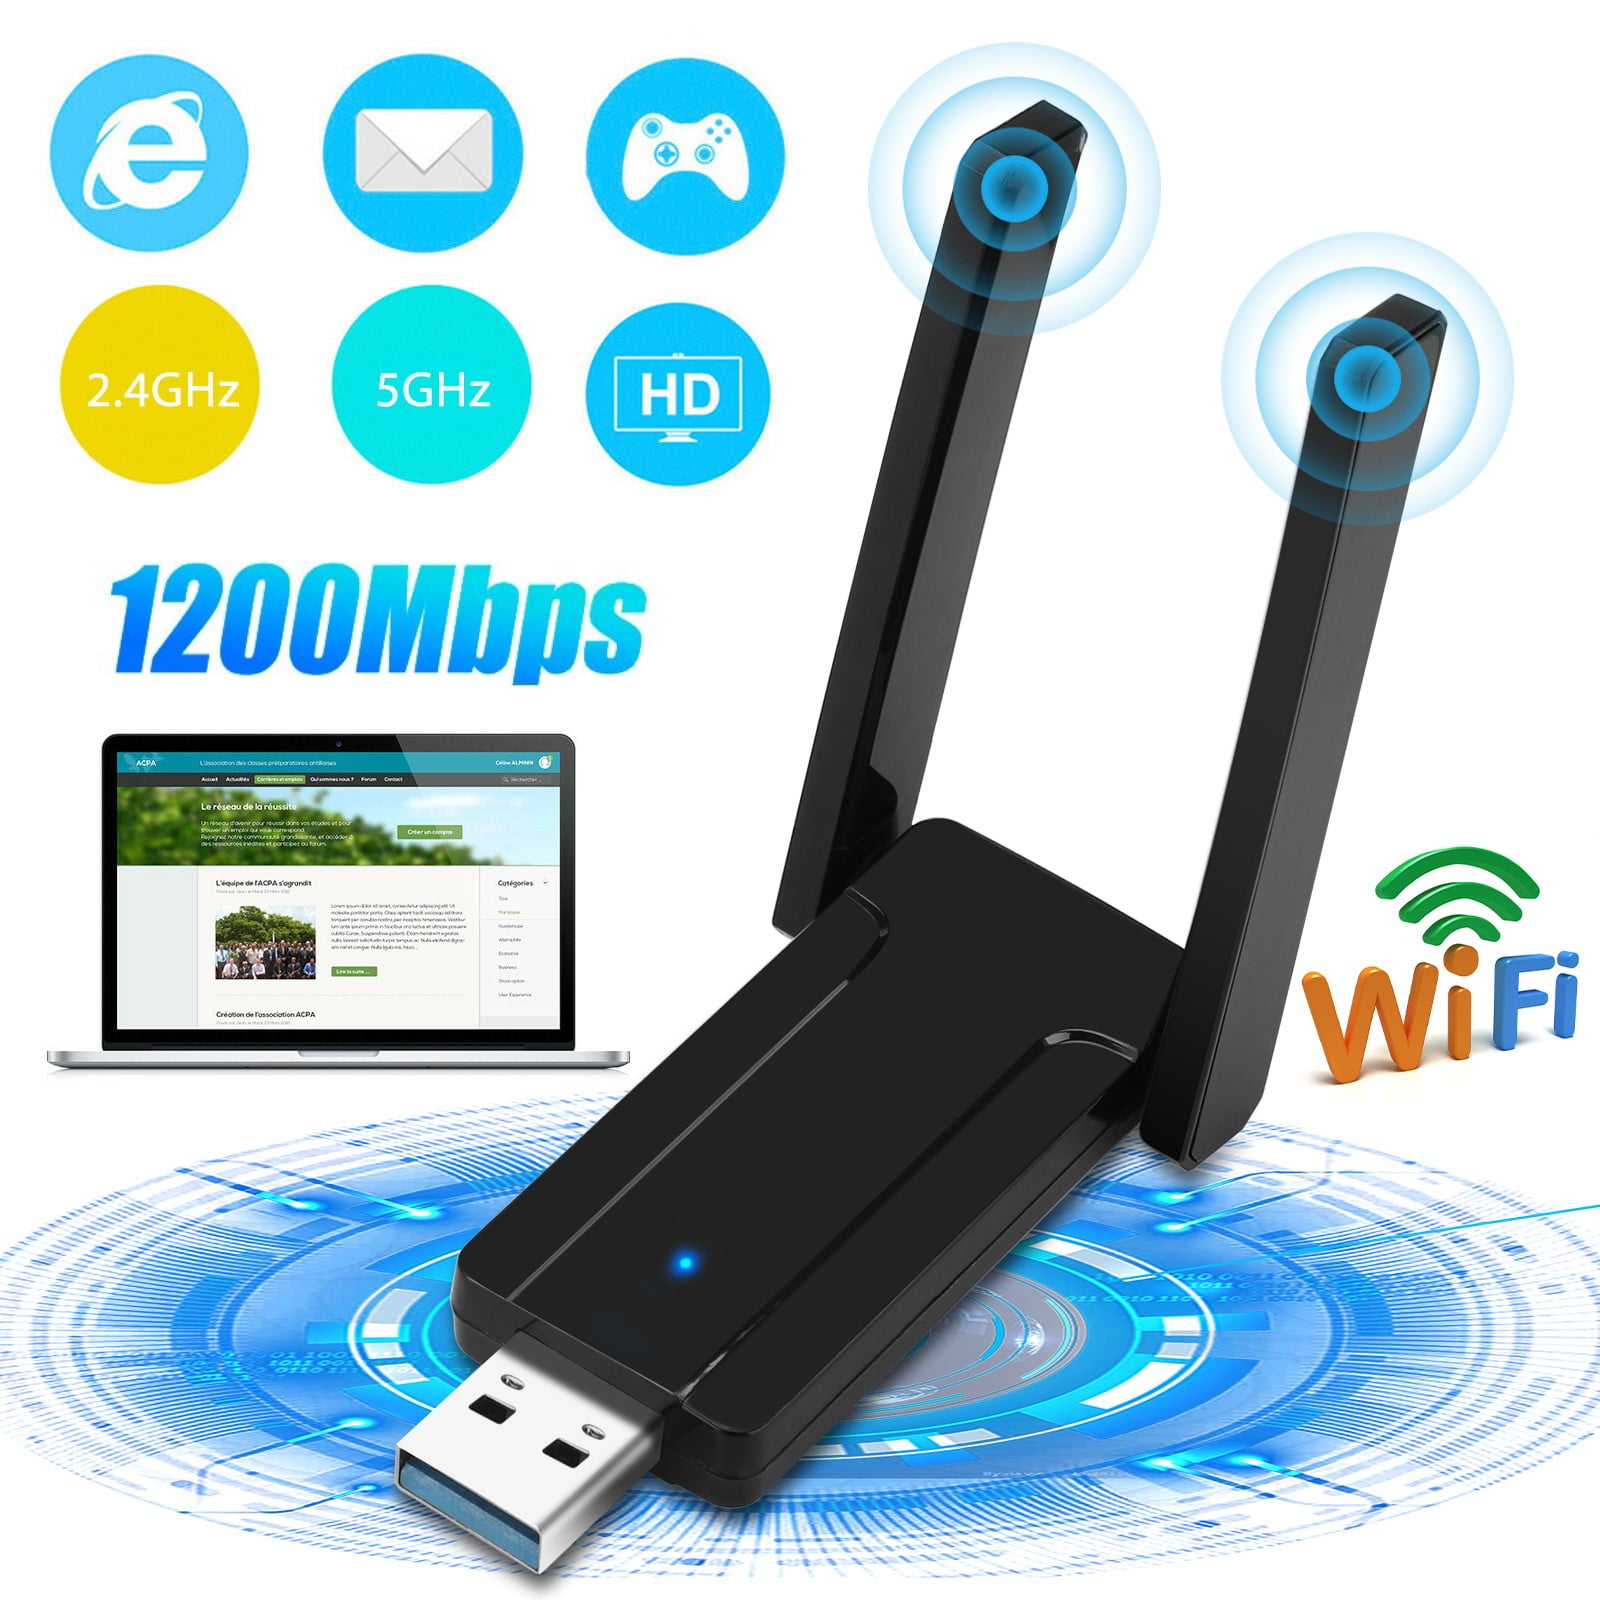 Cater tøve Uskyldig USB WiFi Adapter 1300Mbps, EEEkit USB 3.0 Wireless Network Adapter WiFi  Dongle with High Gain Dual Band 2dBi Antenna for PC Desktop Laptop,  2.4GHz/5GHz WiFi Adapter Support Windows/Mac/Android - Walmart.com